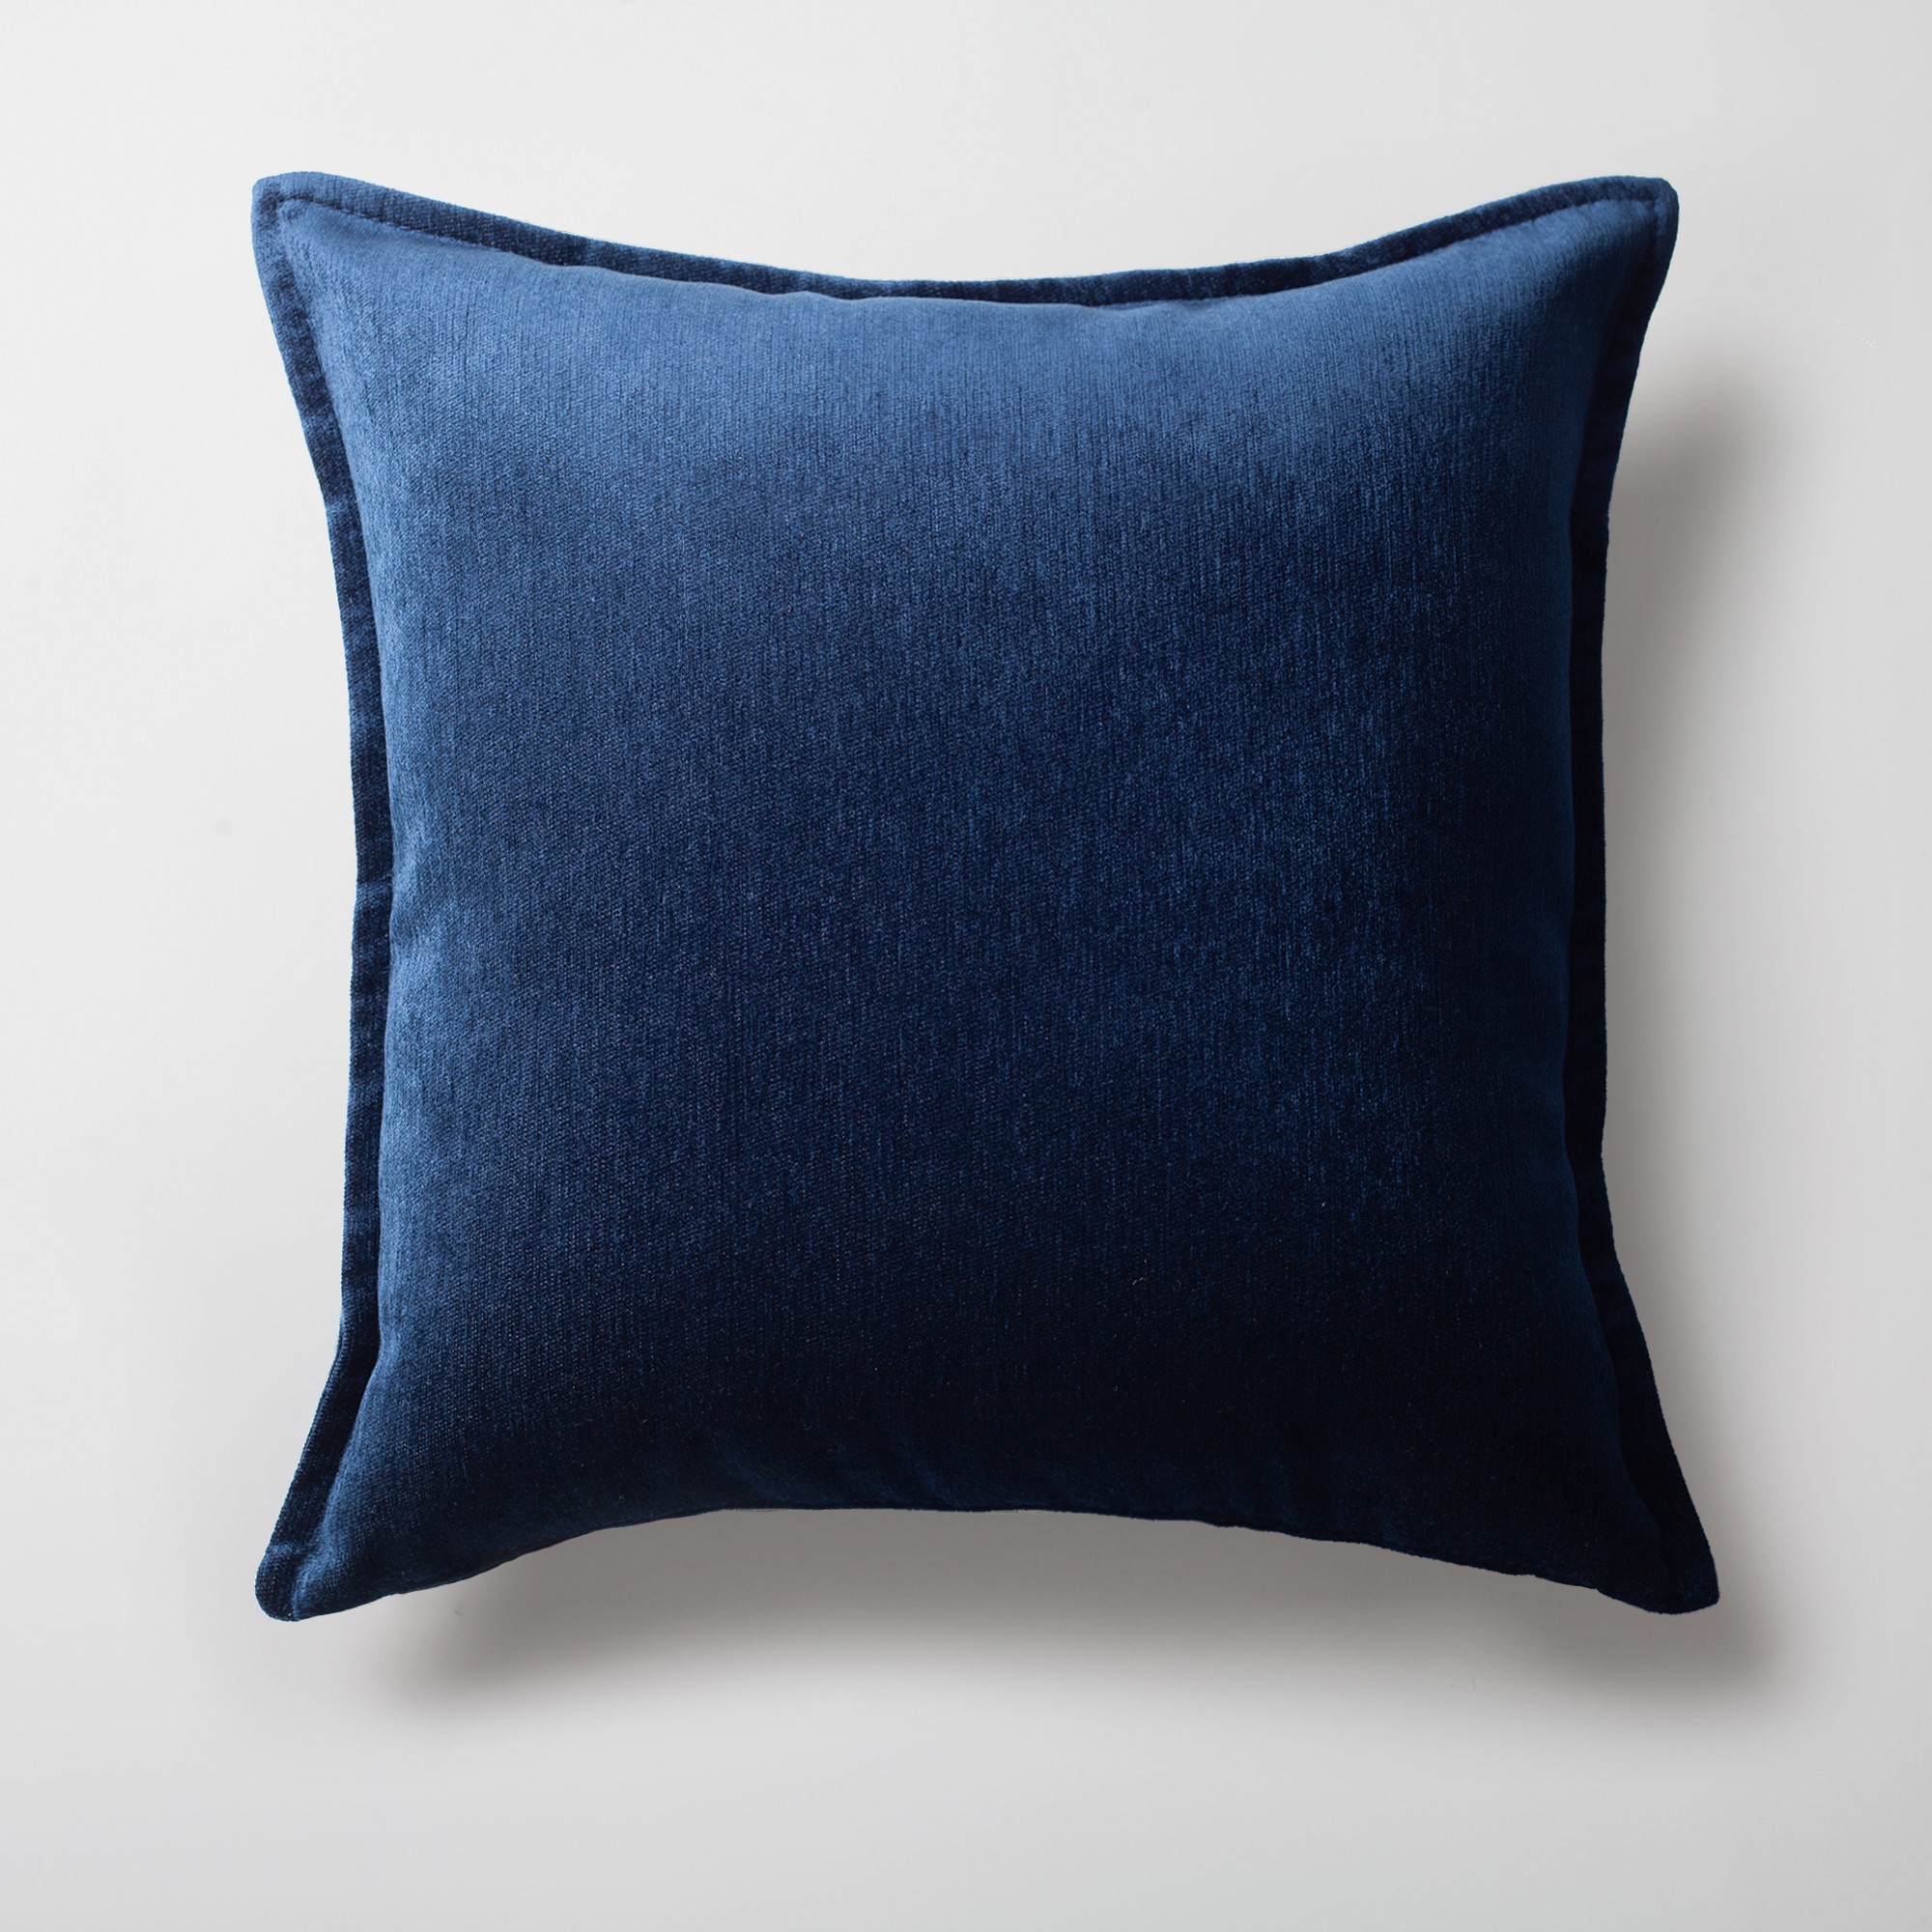 "Eliza" - Viscose Natural Linen Pillow 20x20 Inch - Navy Blue (Cover Only)